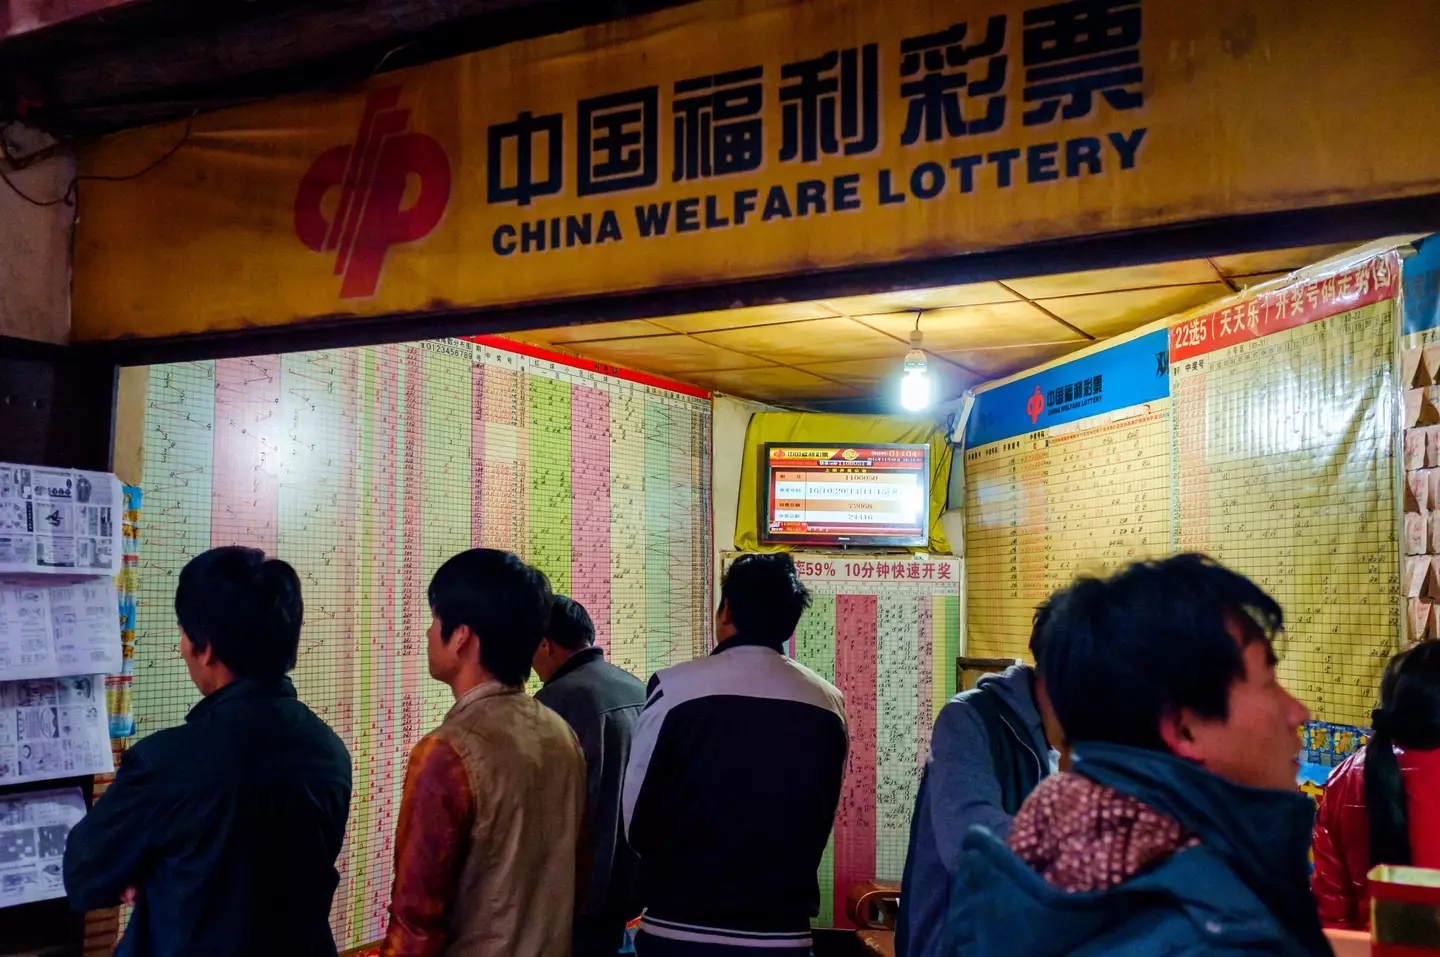 The lottery win totalled 8.43 million yuan (£1 million).